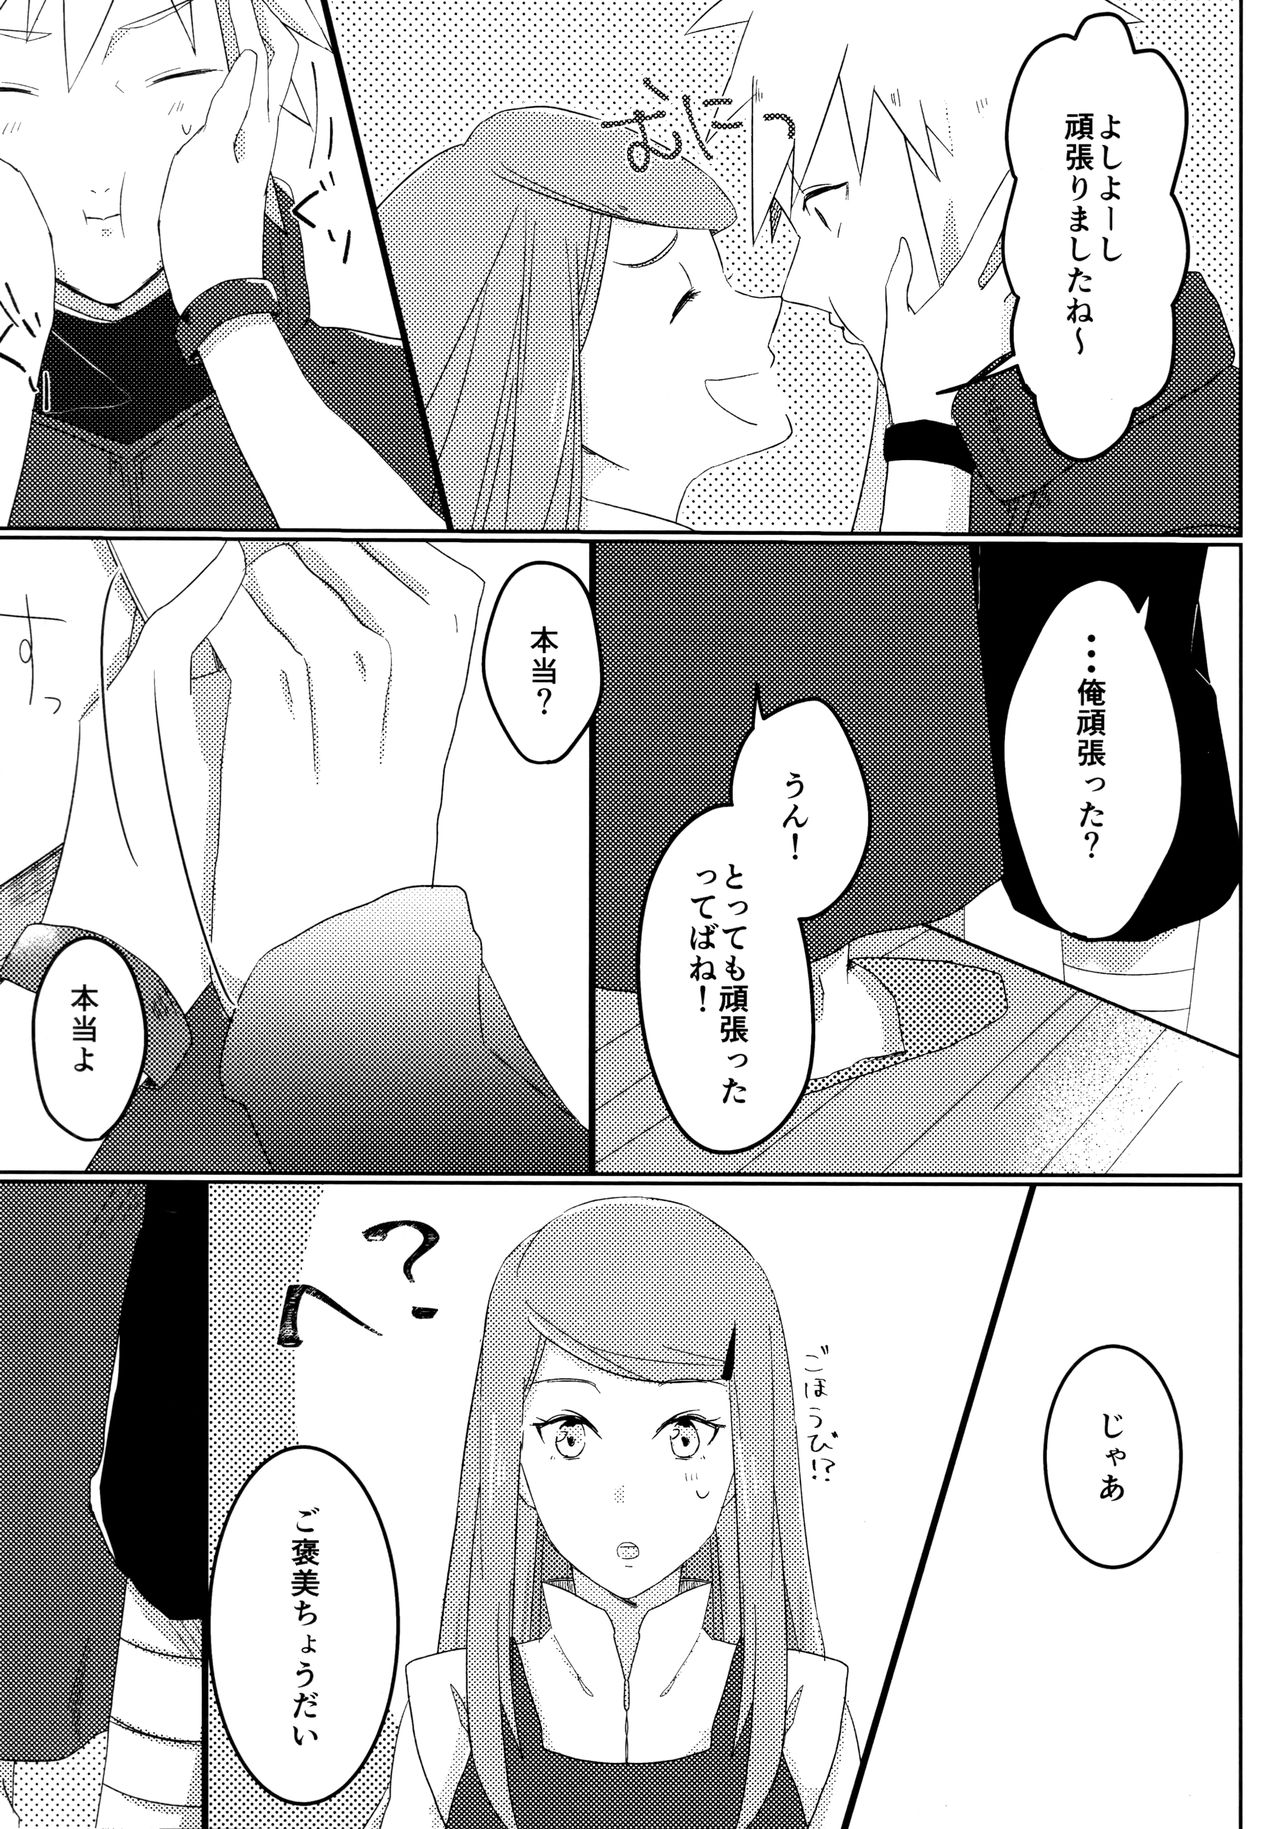 (Zennin Shuuketsu 6) [Fragrant Olive (SIN)] Only You Know (Naruto) page 4 full